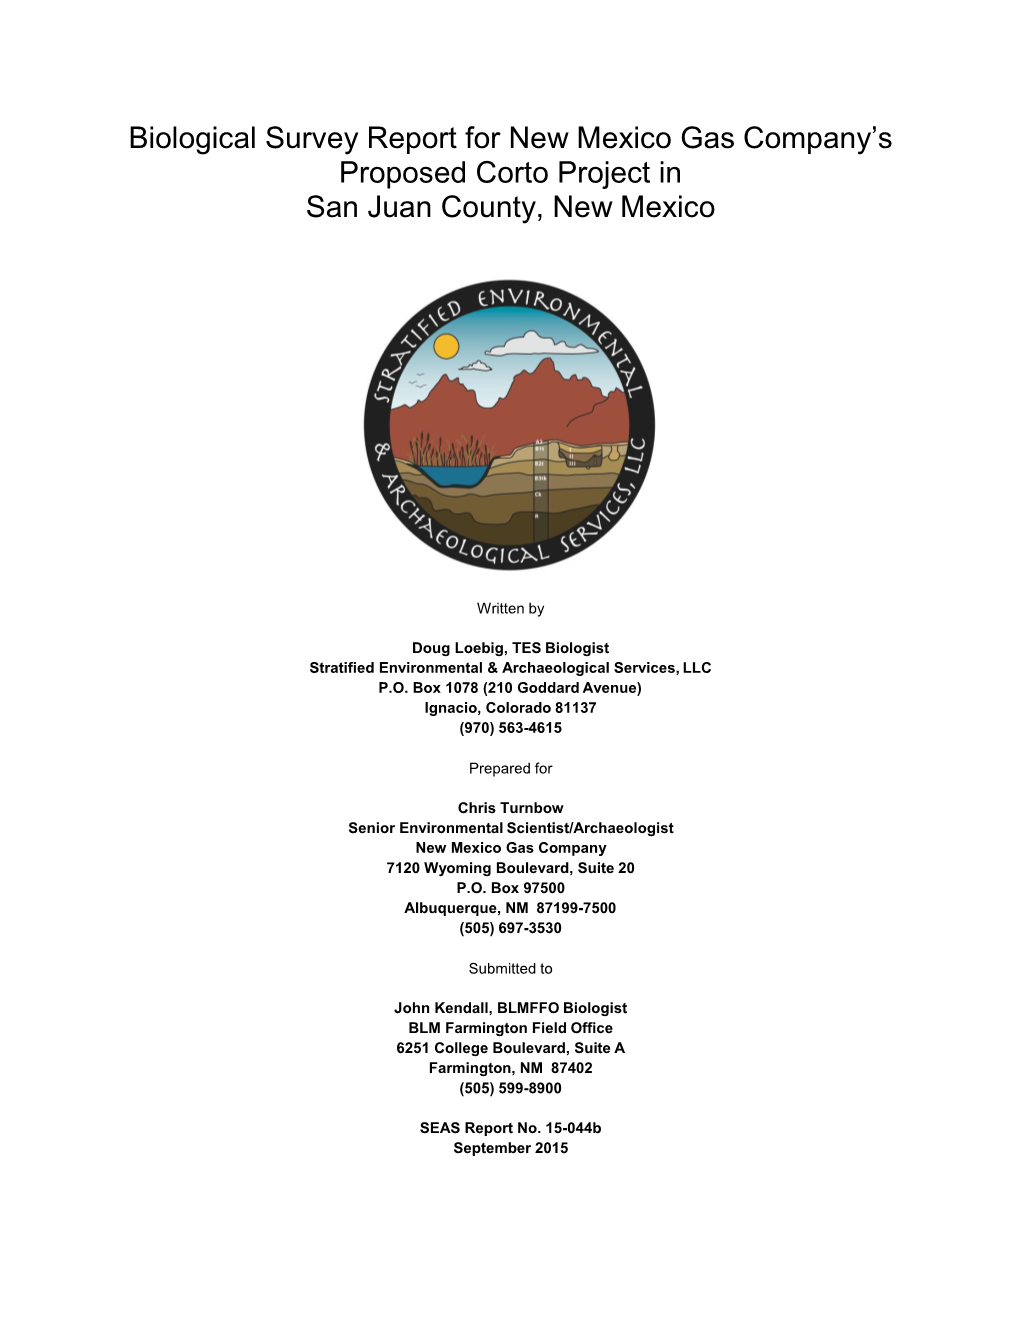 Biological Survey Report for New Mexico Gas Company's Proposed